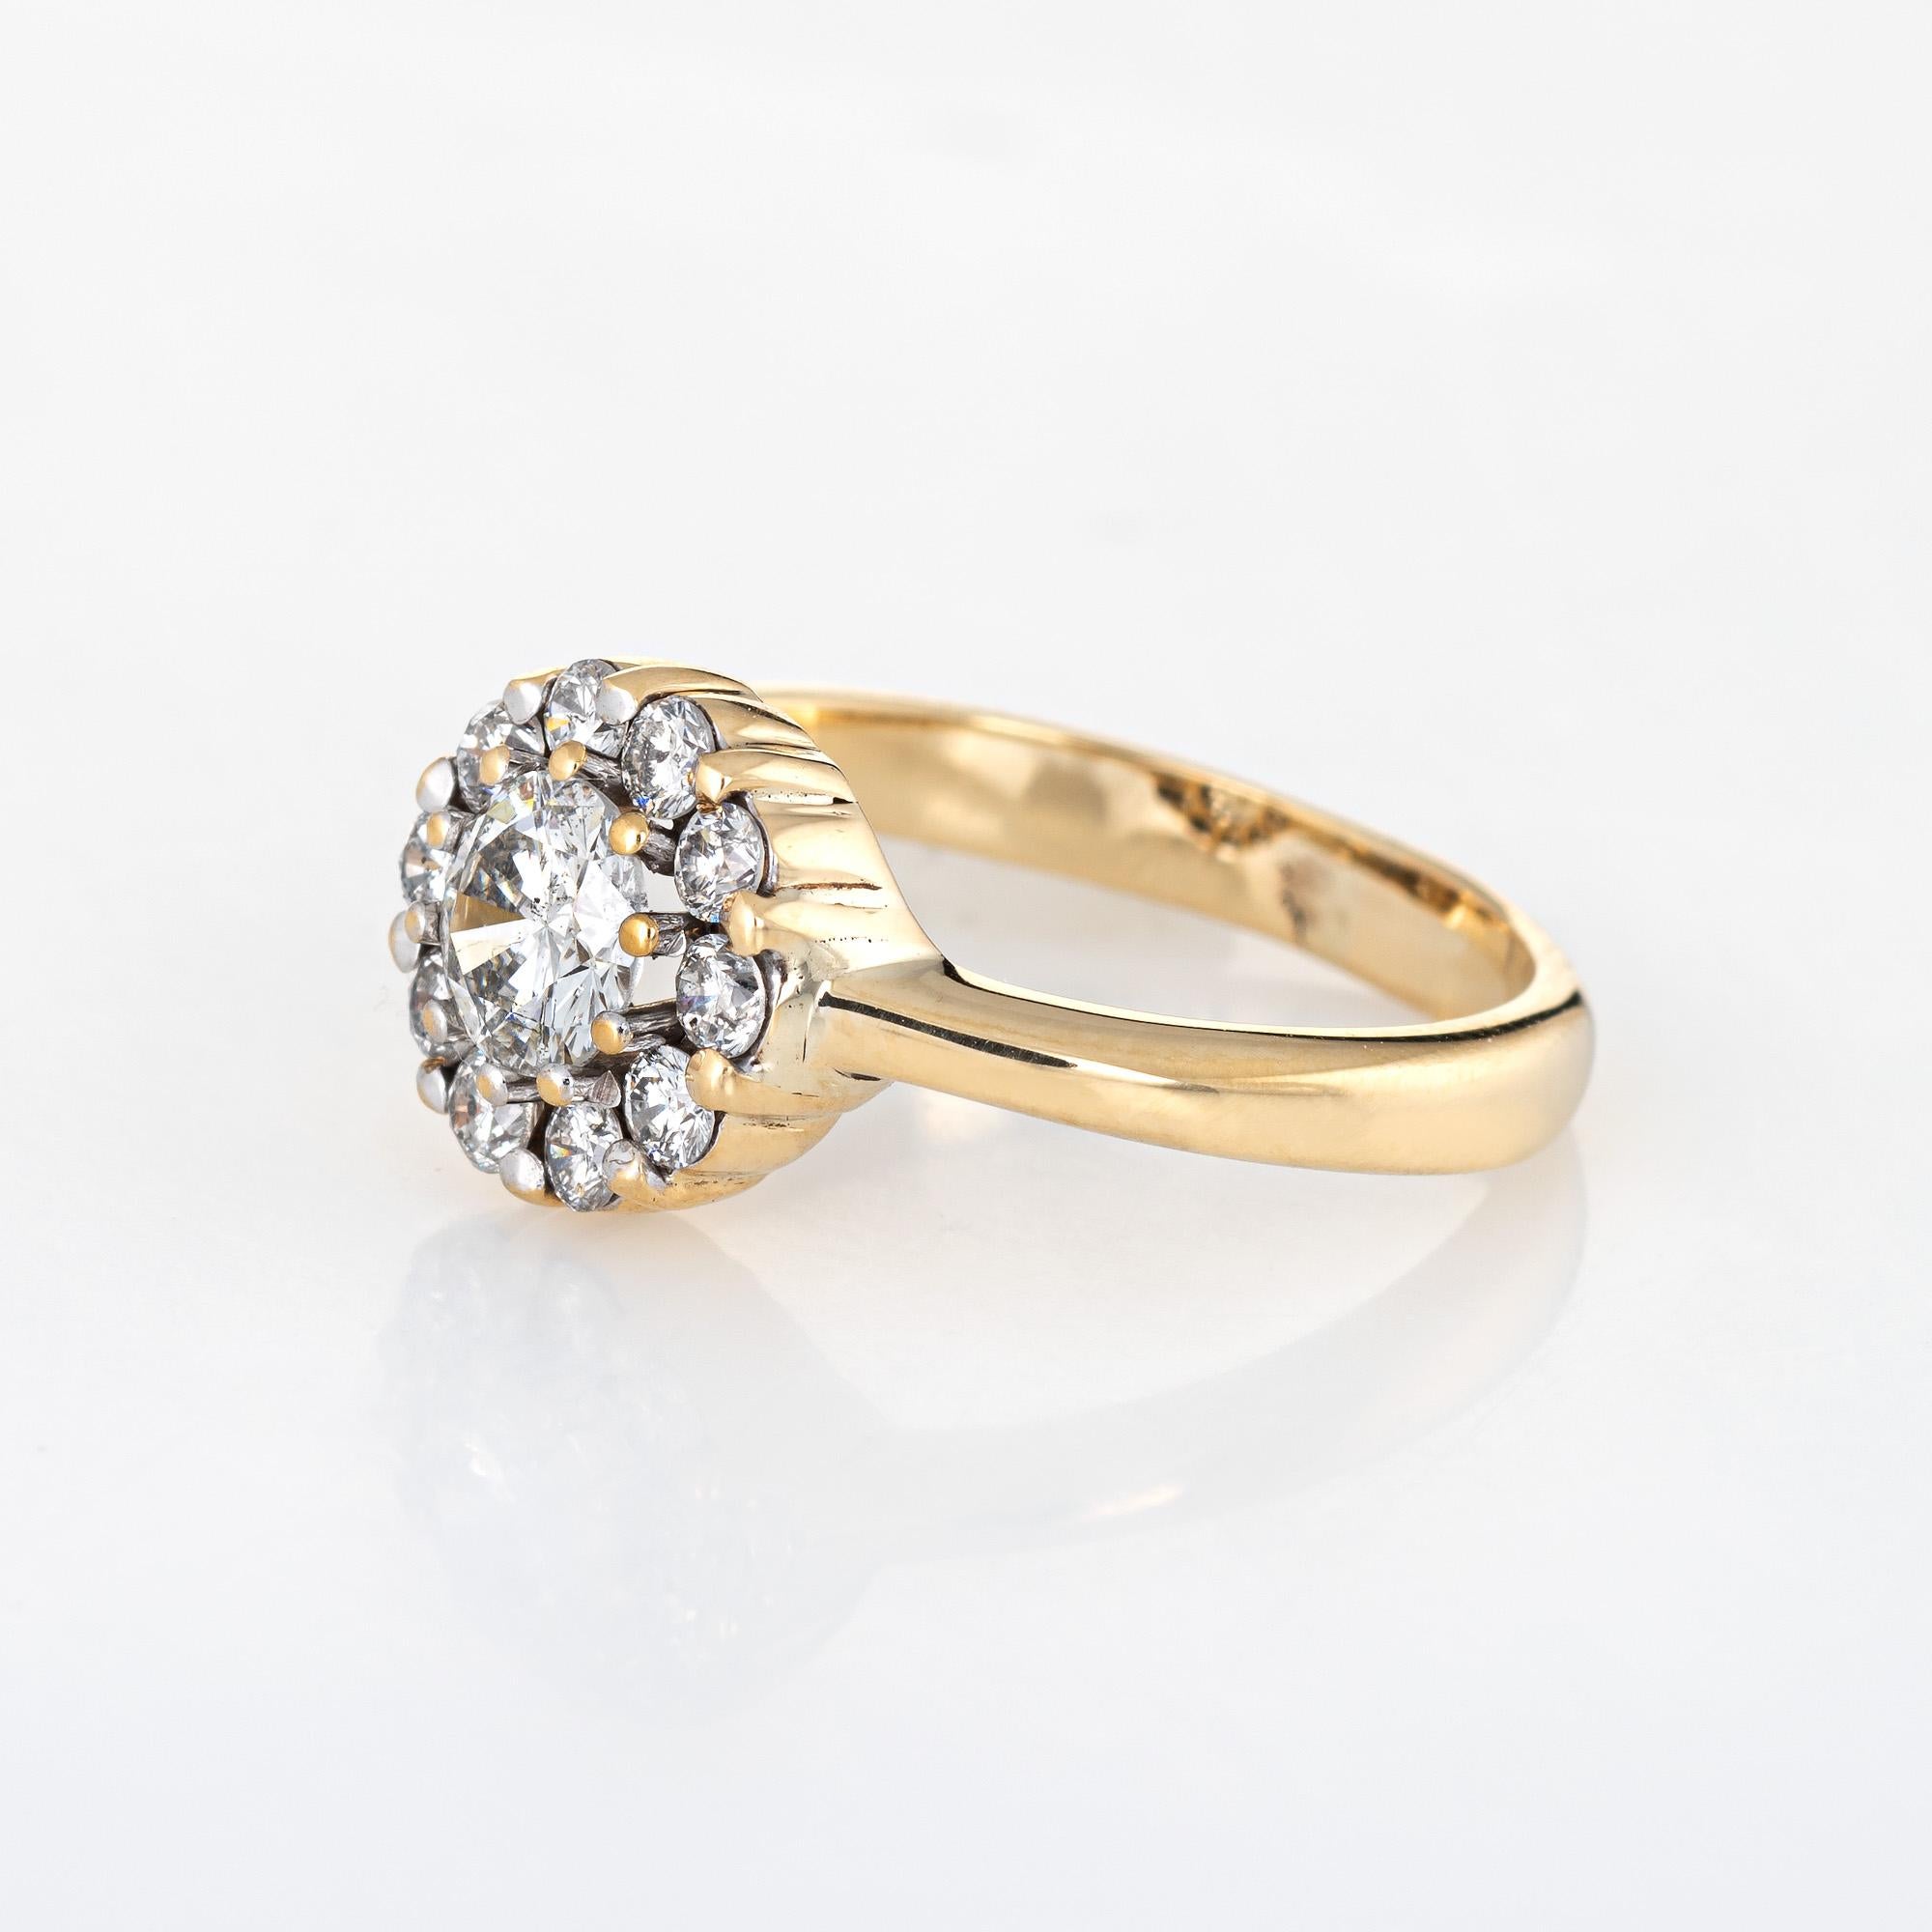 Details about   4.35 Ct Round Diamond Men's Women's Cluster Engagement Ring 14k Yellow Gold Over 